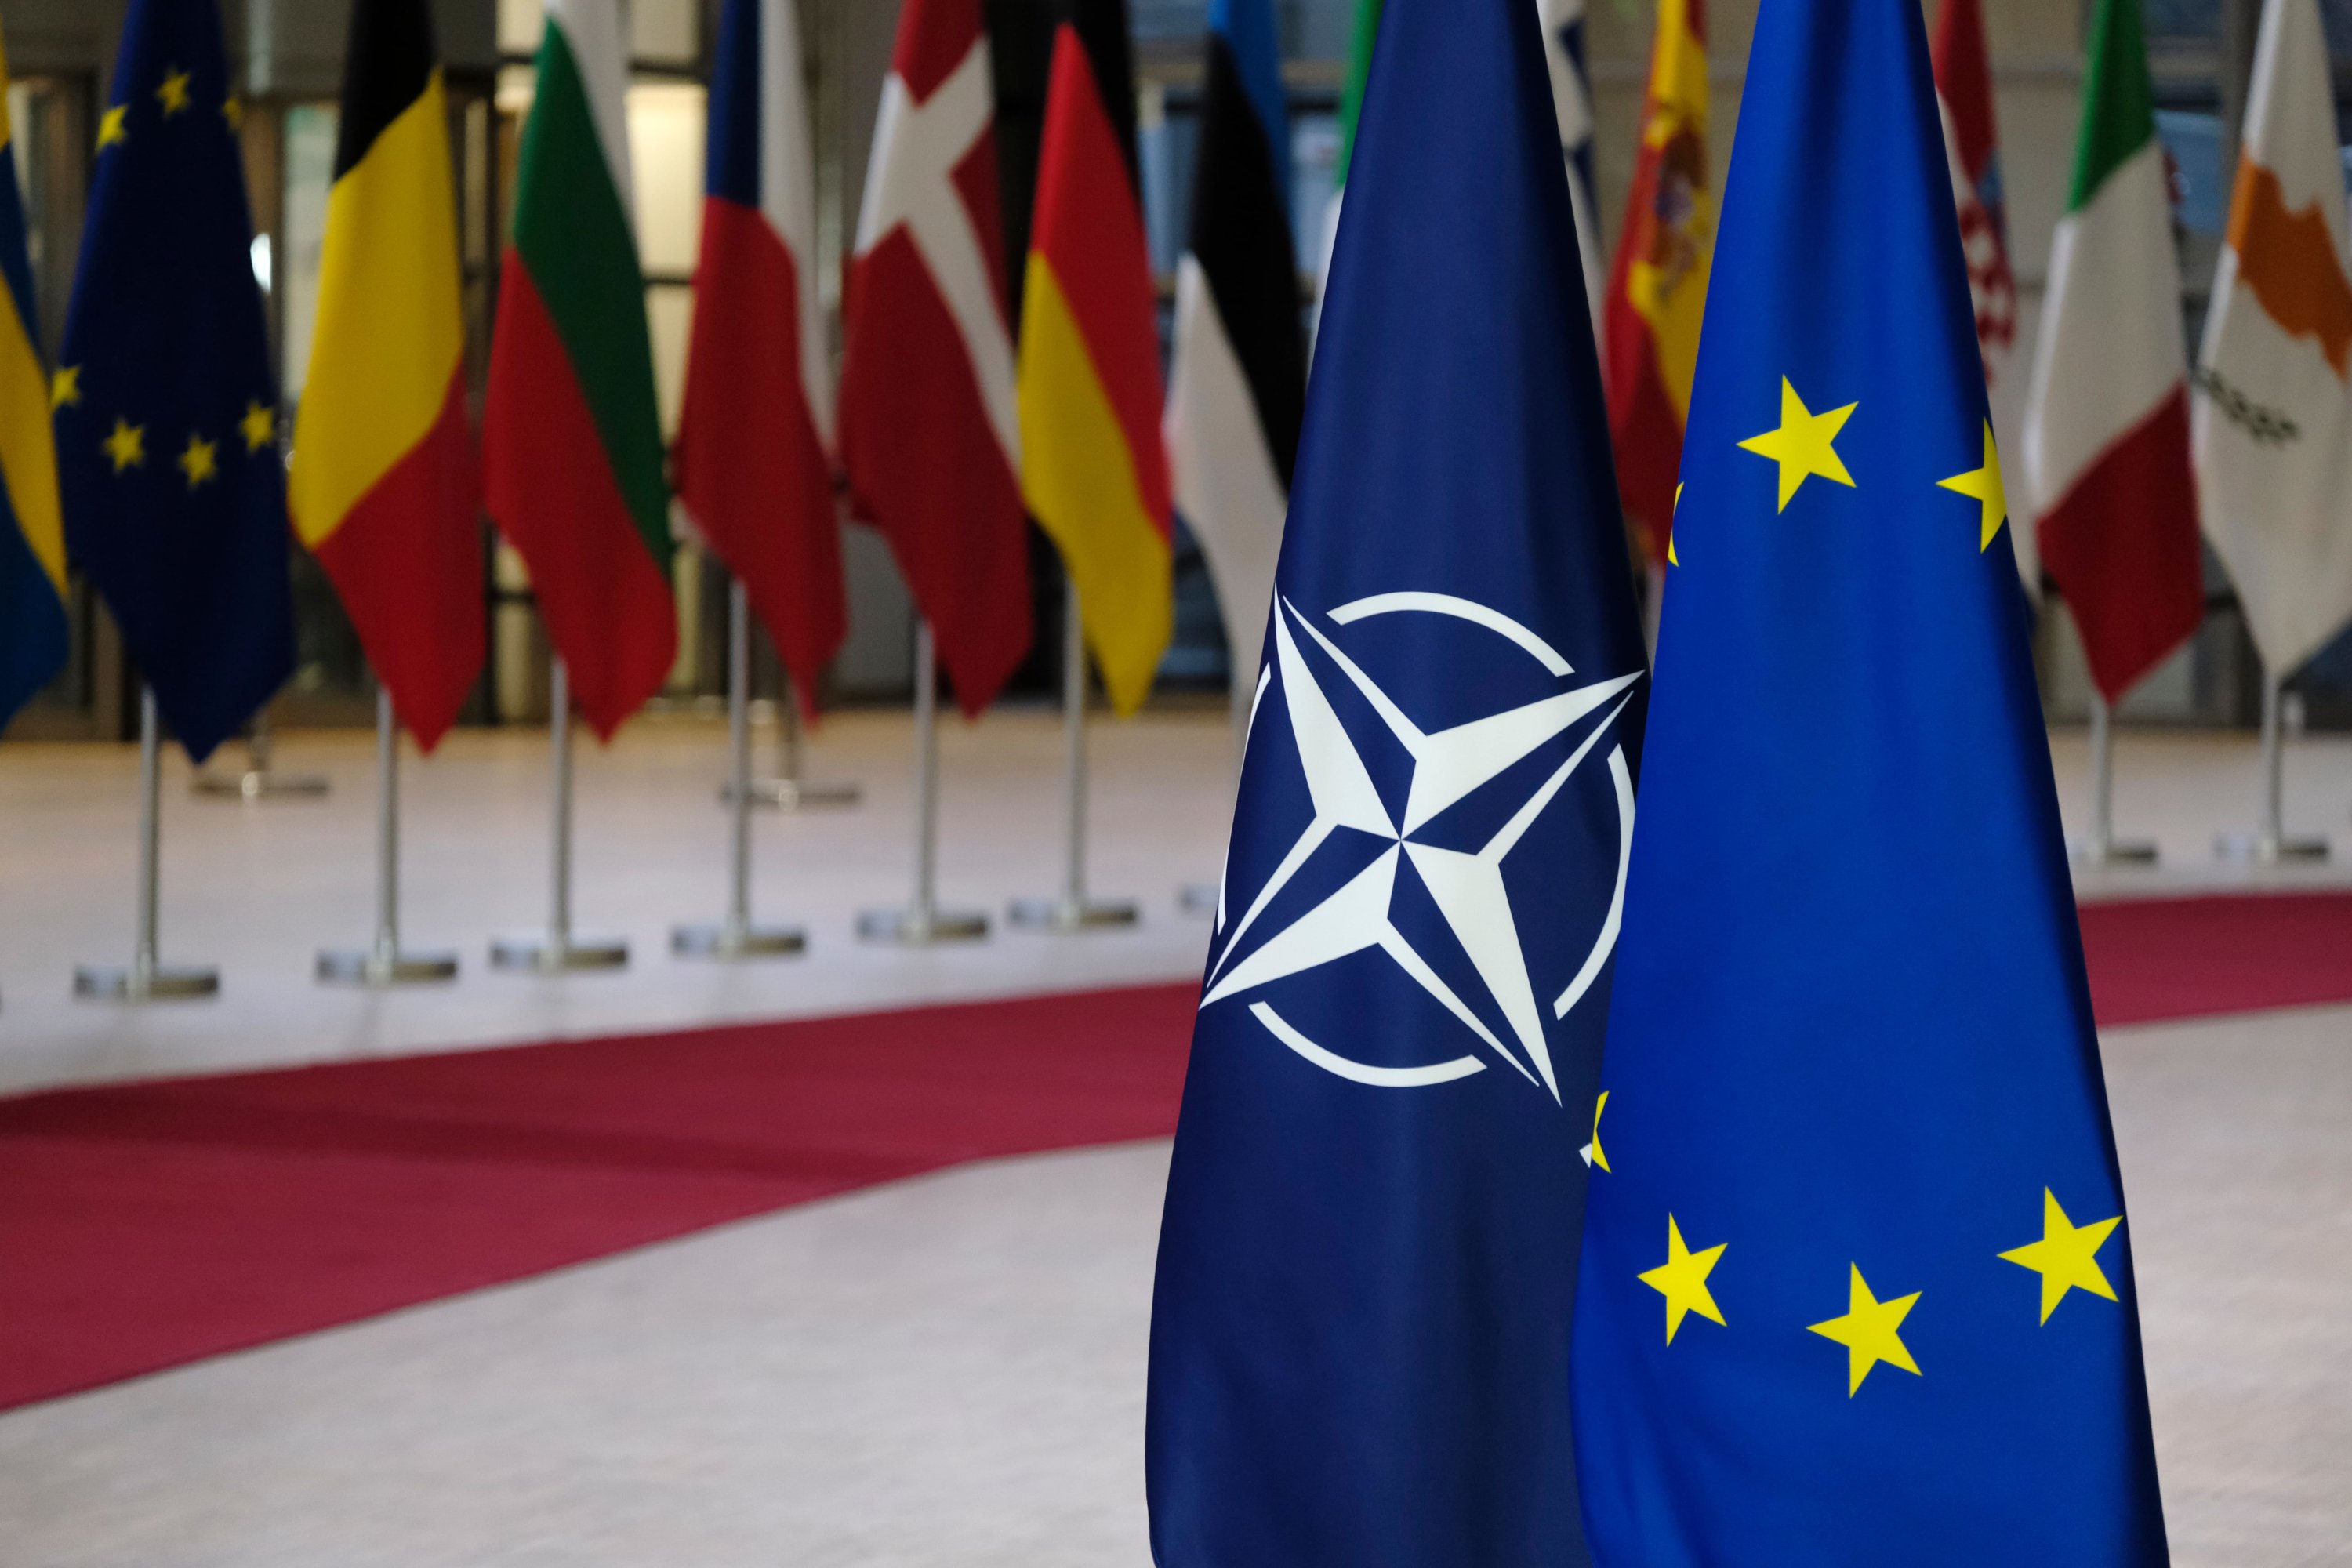 Thriving NATO, EU ties amid shifting security dynamics in Europe | Opinion